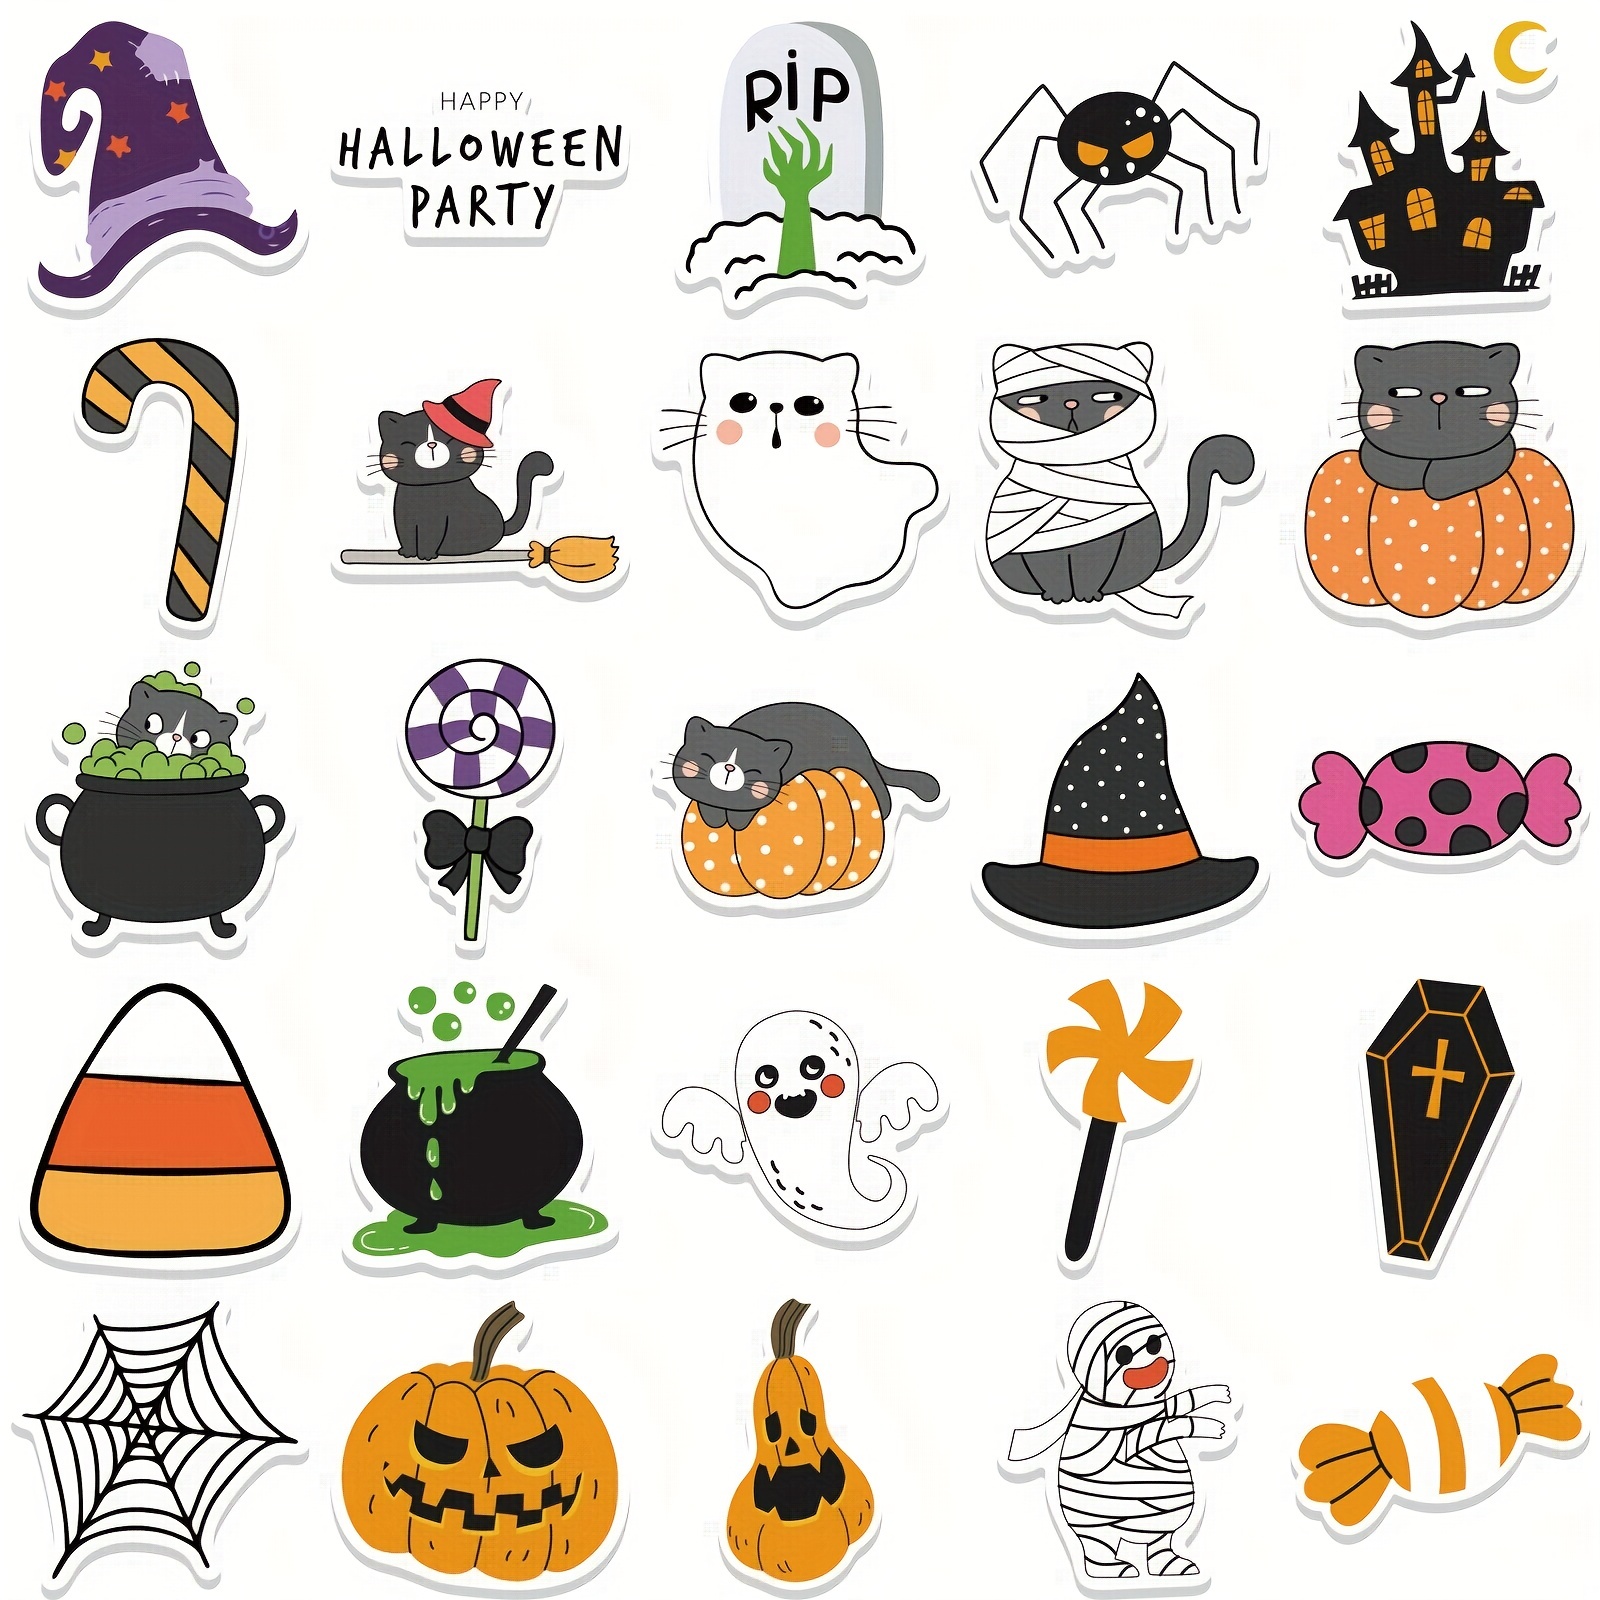 Cute Ghost Stickers, 40 PCS Vinyl Waterproof Cute Ghost Small Stickers for  Phone Case, Water Bottles, Laptops 